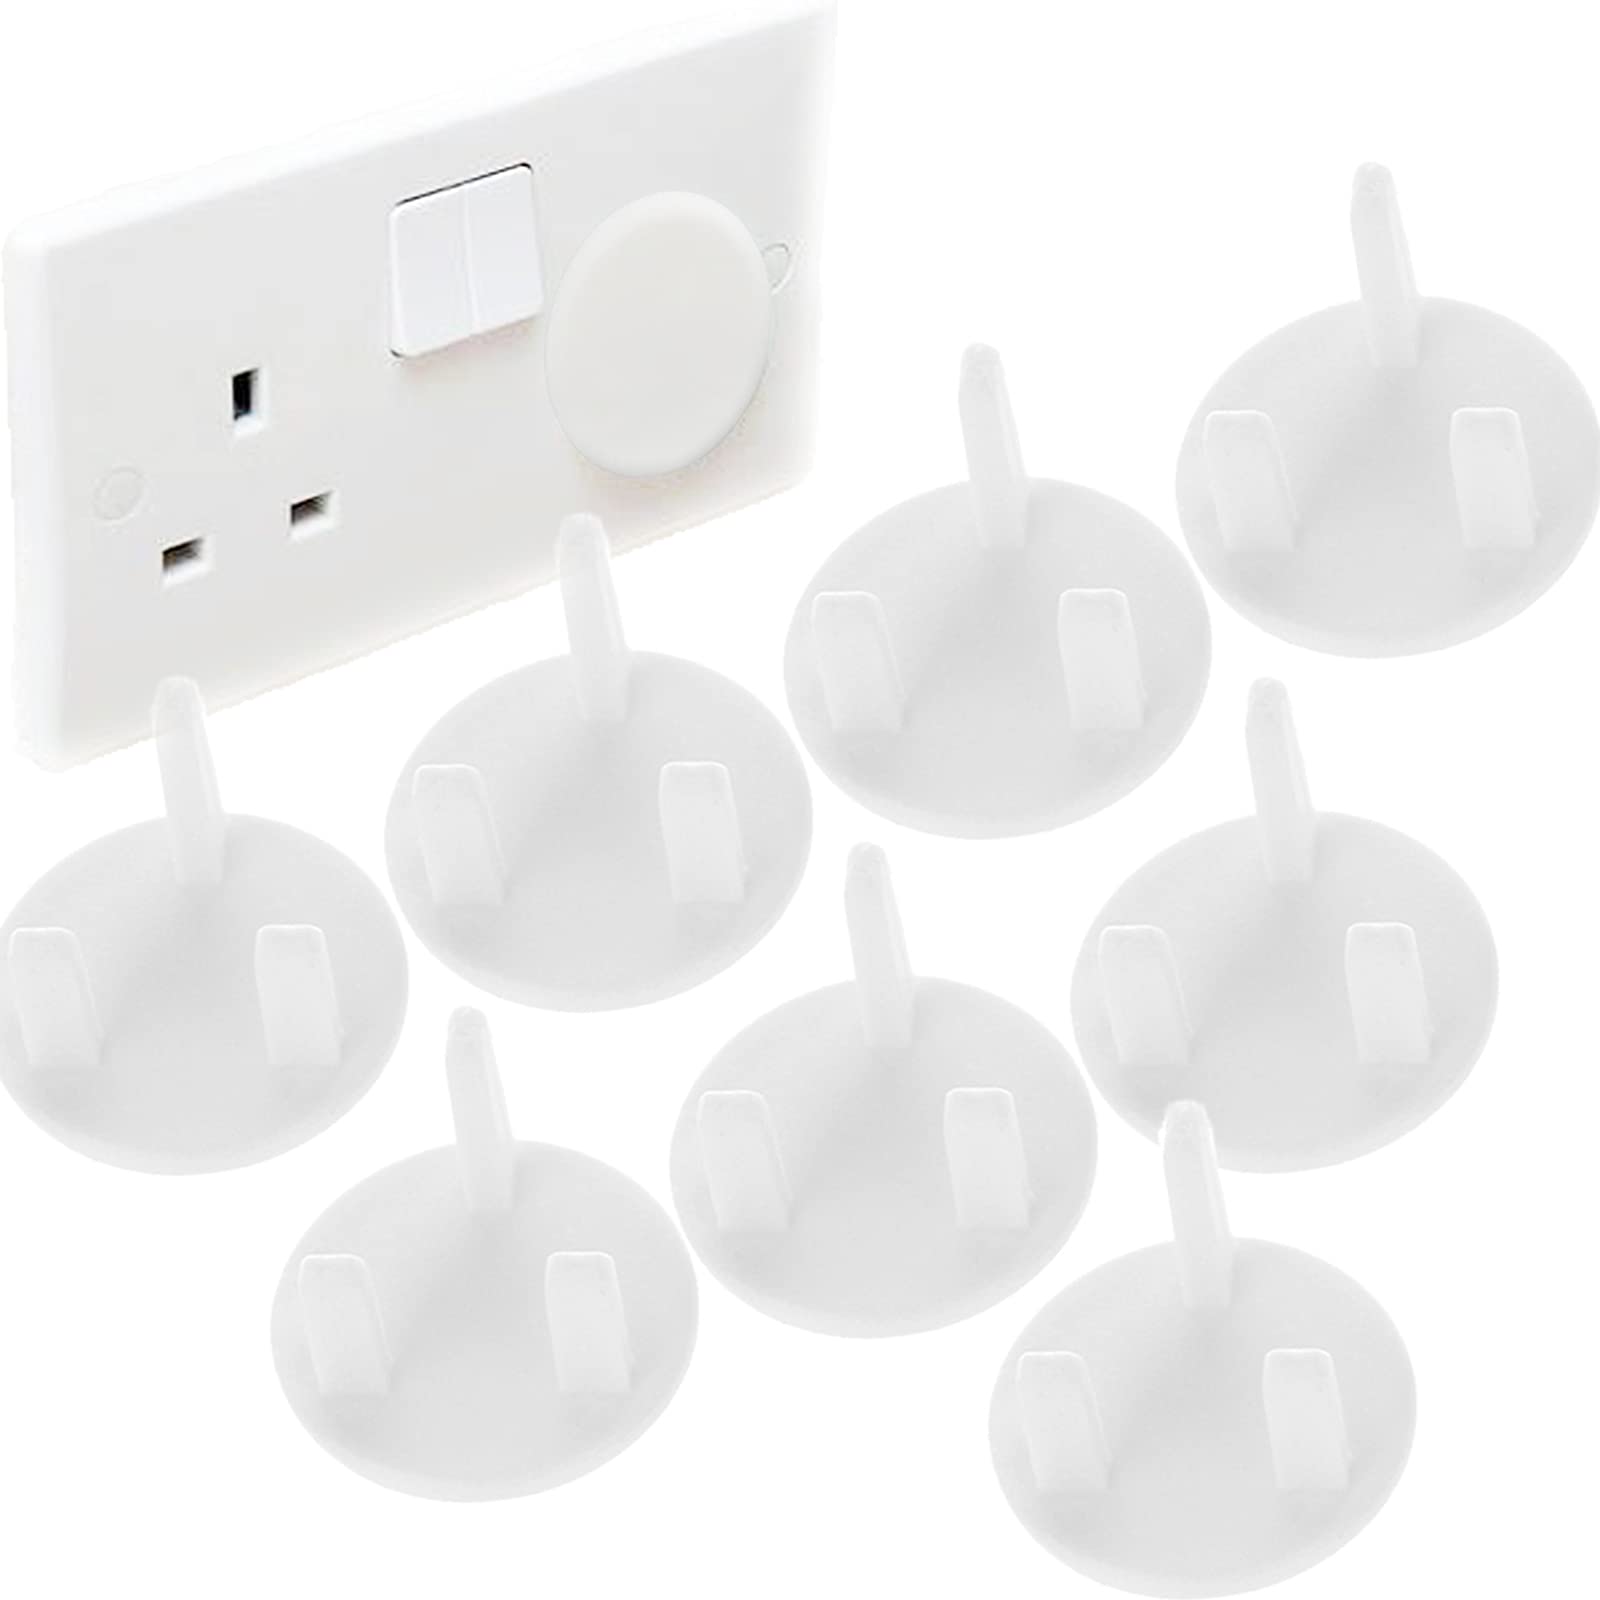 Wendergo Plug Socket Covers UK White Baby Safety Socket Covers Electrical Outlet Socket Protectors Socket Caps, Perfect for Children Safety at Home and School(8Pack)